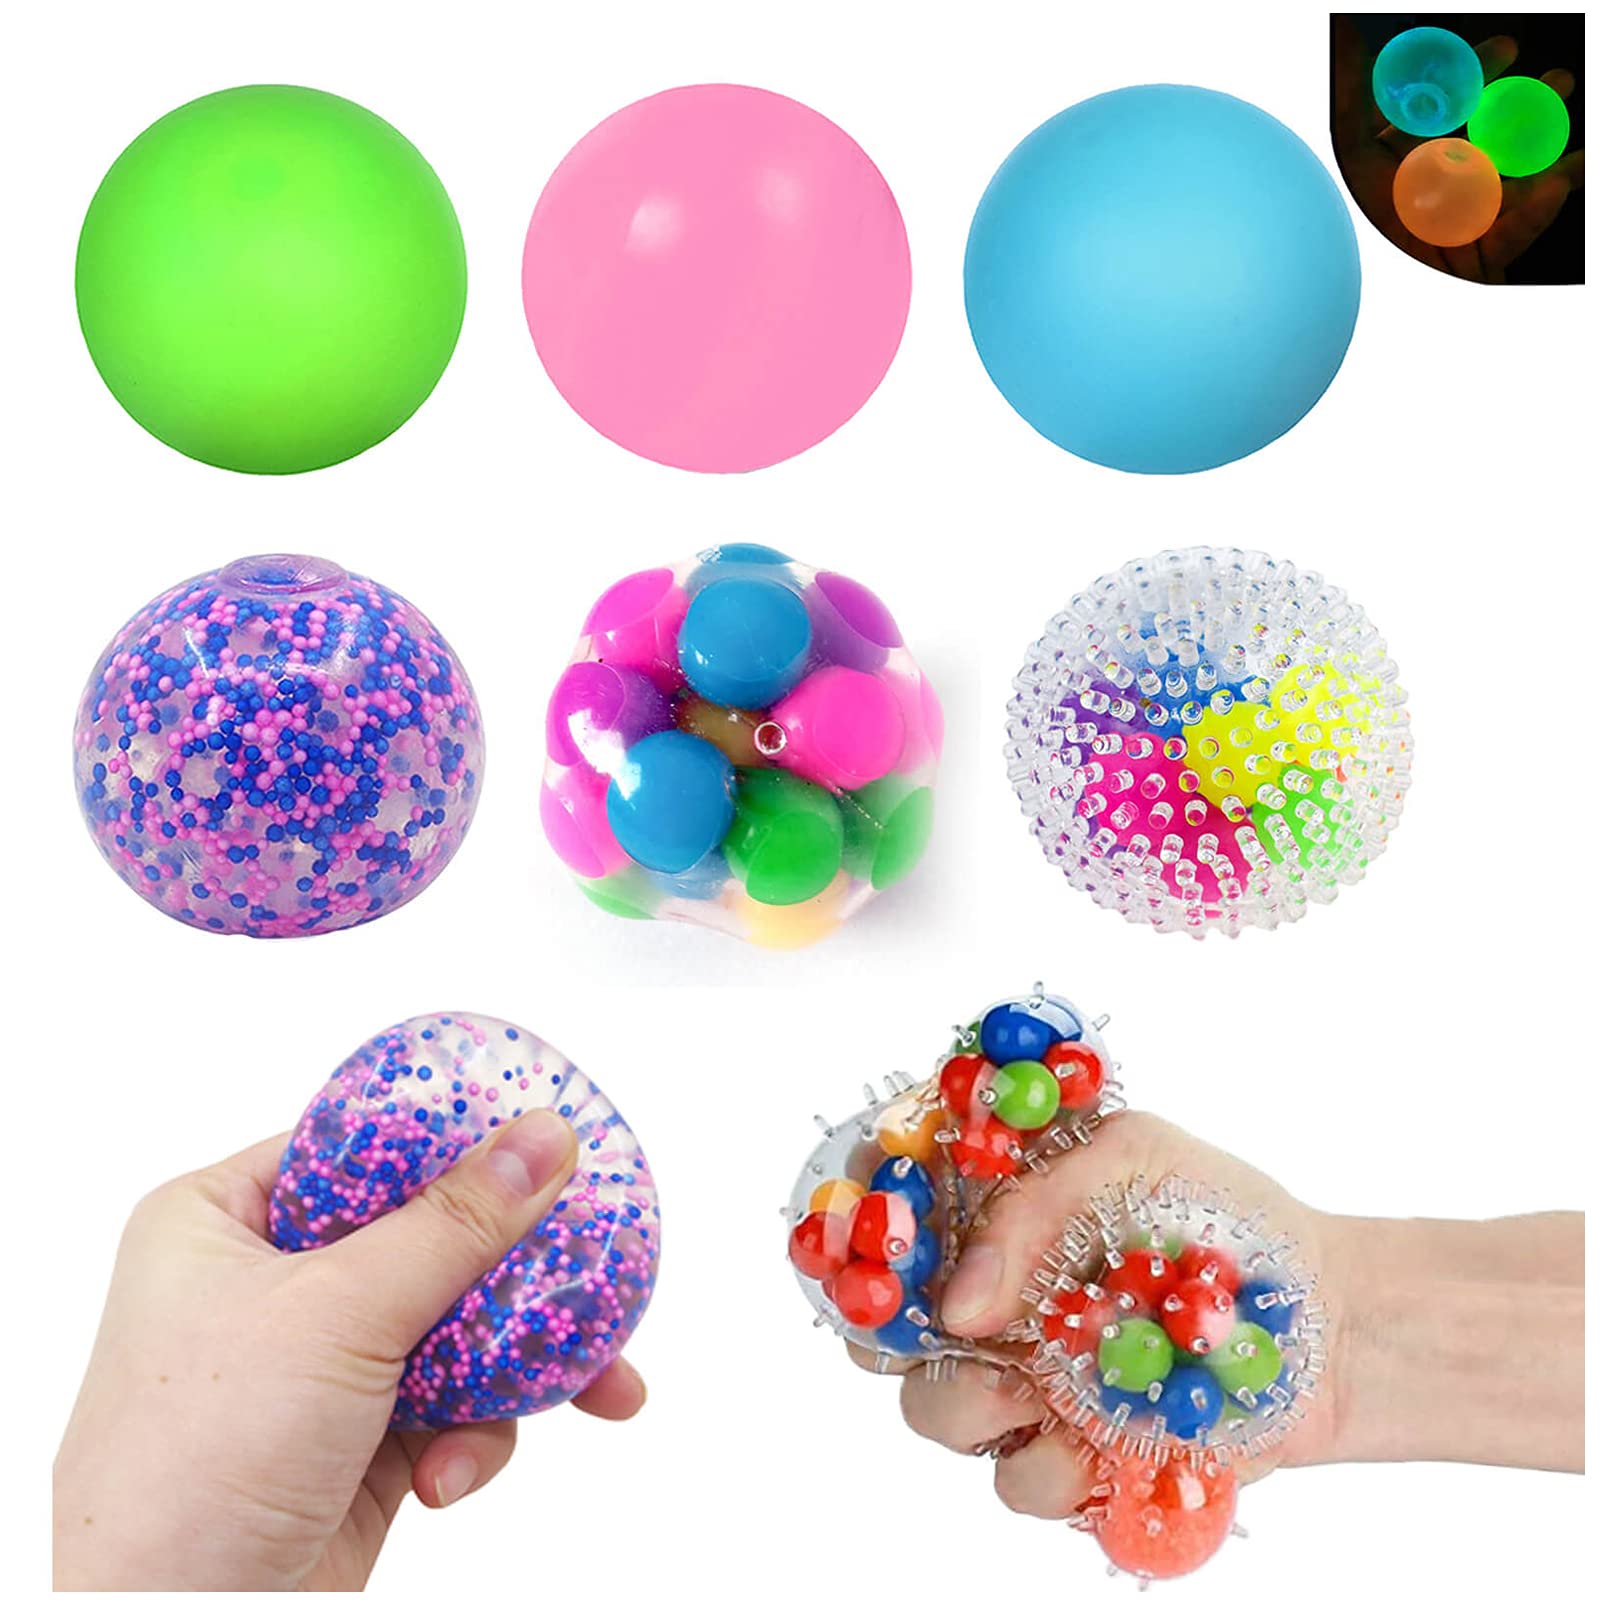 Stress Balls Fidget Toys - 6 Pack Sticky Glowing Balls Sensory Stress Relief Fidget Balls for Kids/Adults to Relax, Anxiety Relief, Decompress, Focus, Squeeze Toys for Autism Birthday/Party Favor